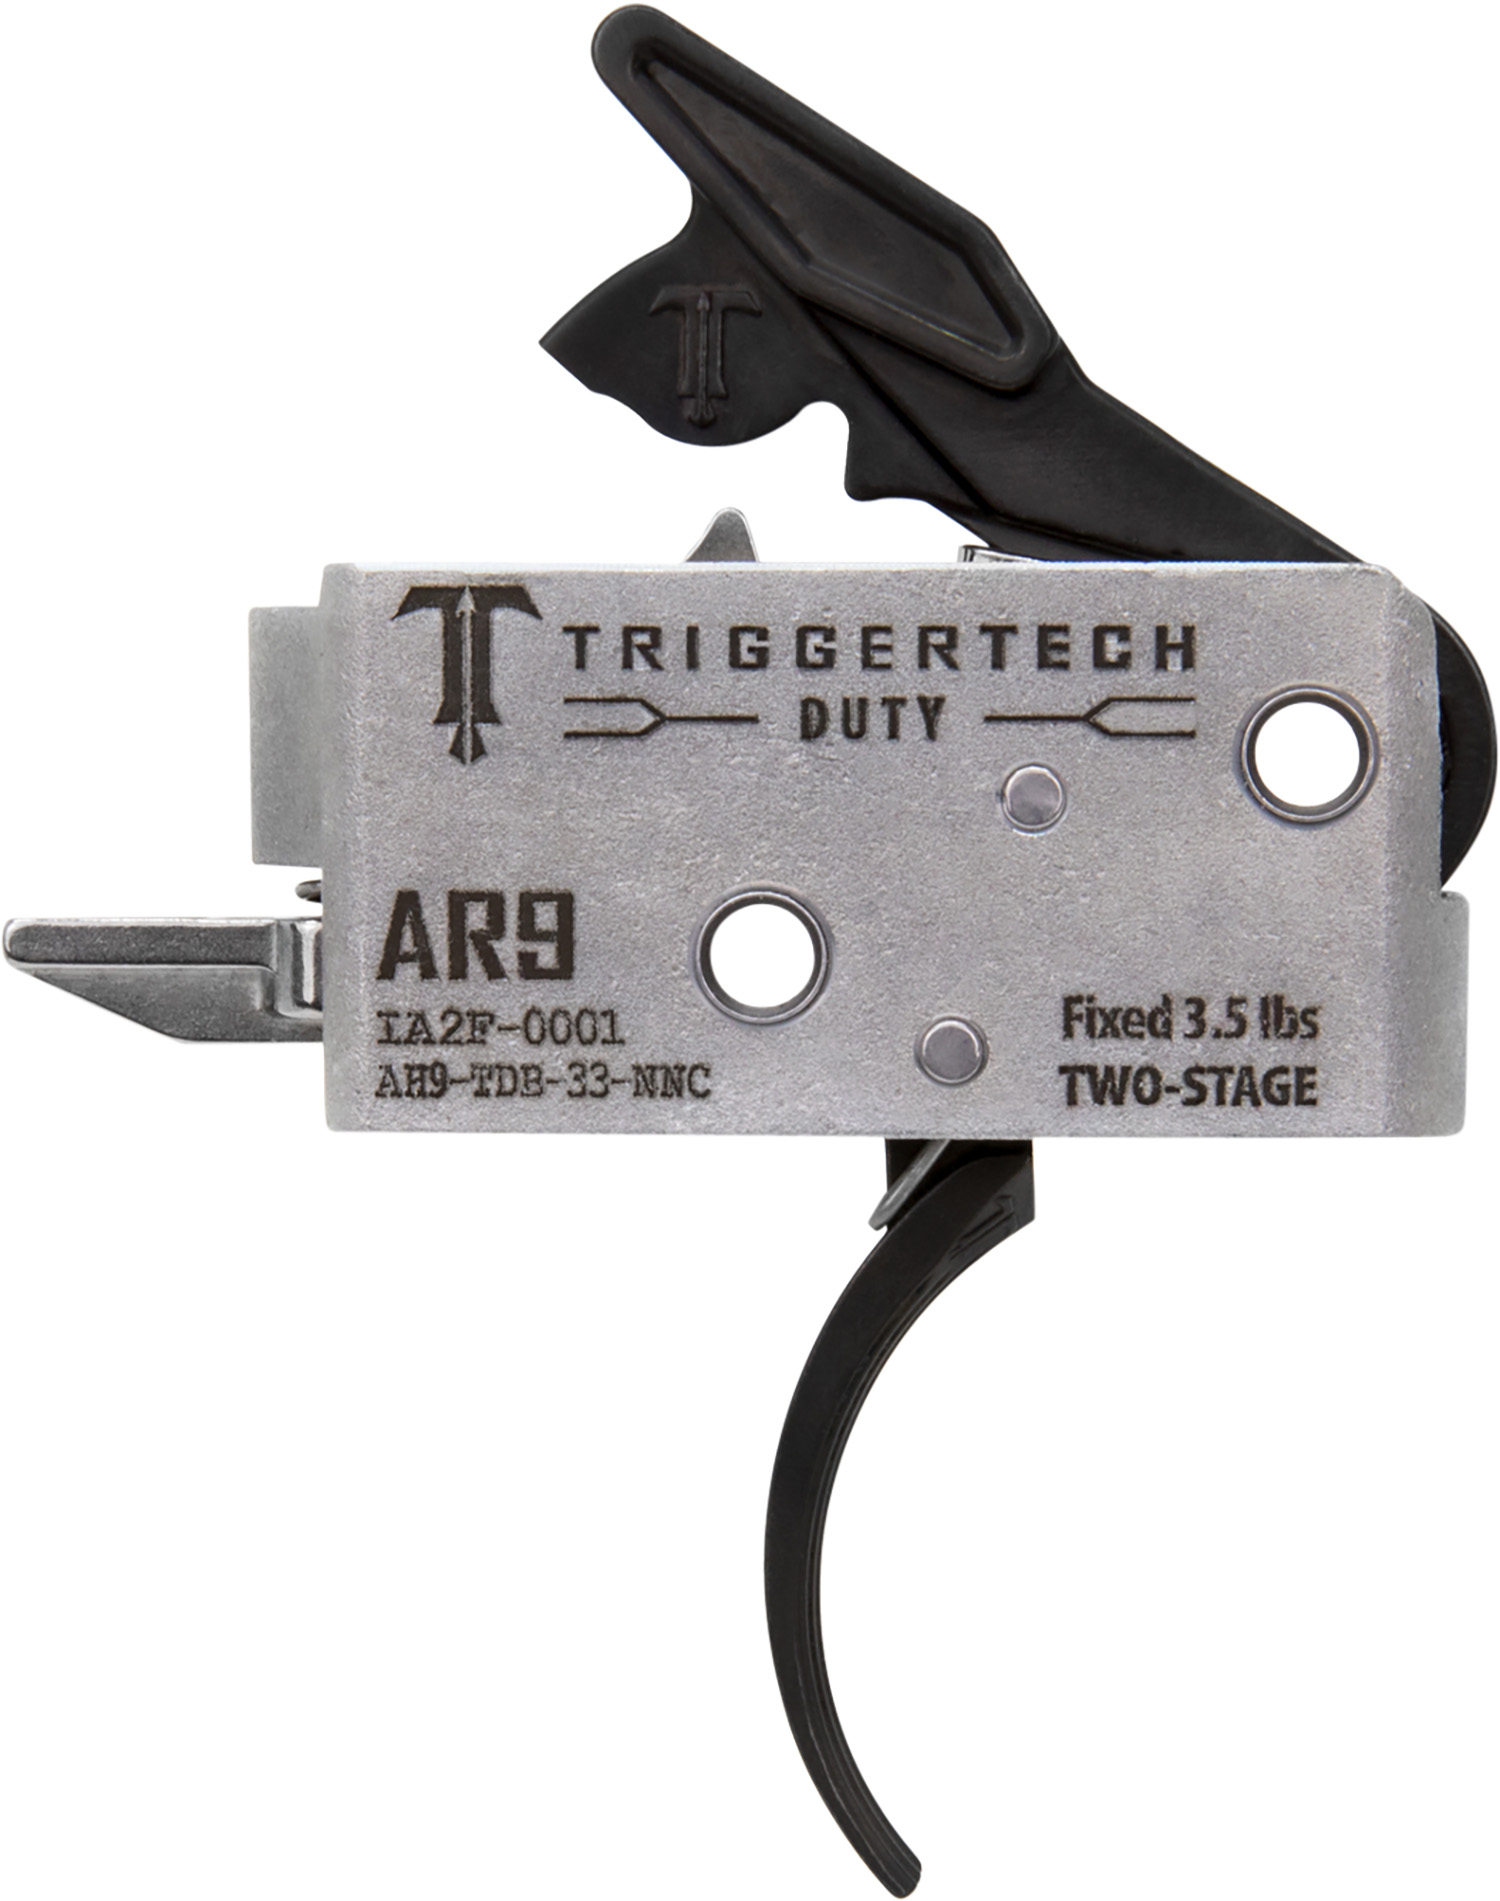 TriggerTech Ah9TDB33NNC Duty Curved Two-Stage 3.50 Lbs Draw Weight Fits AR-9